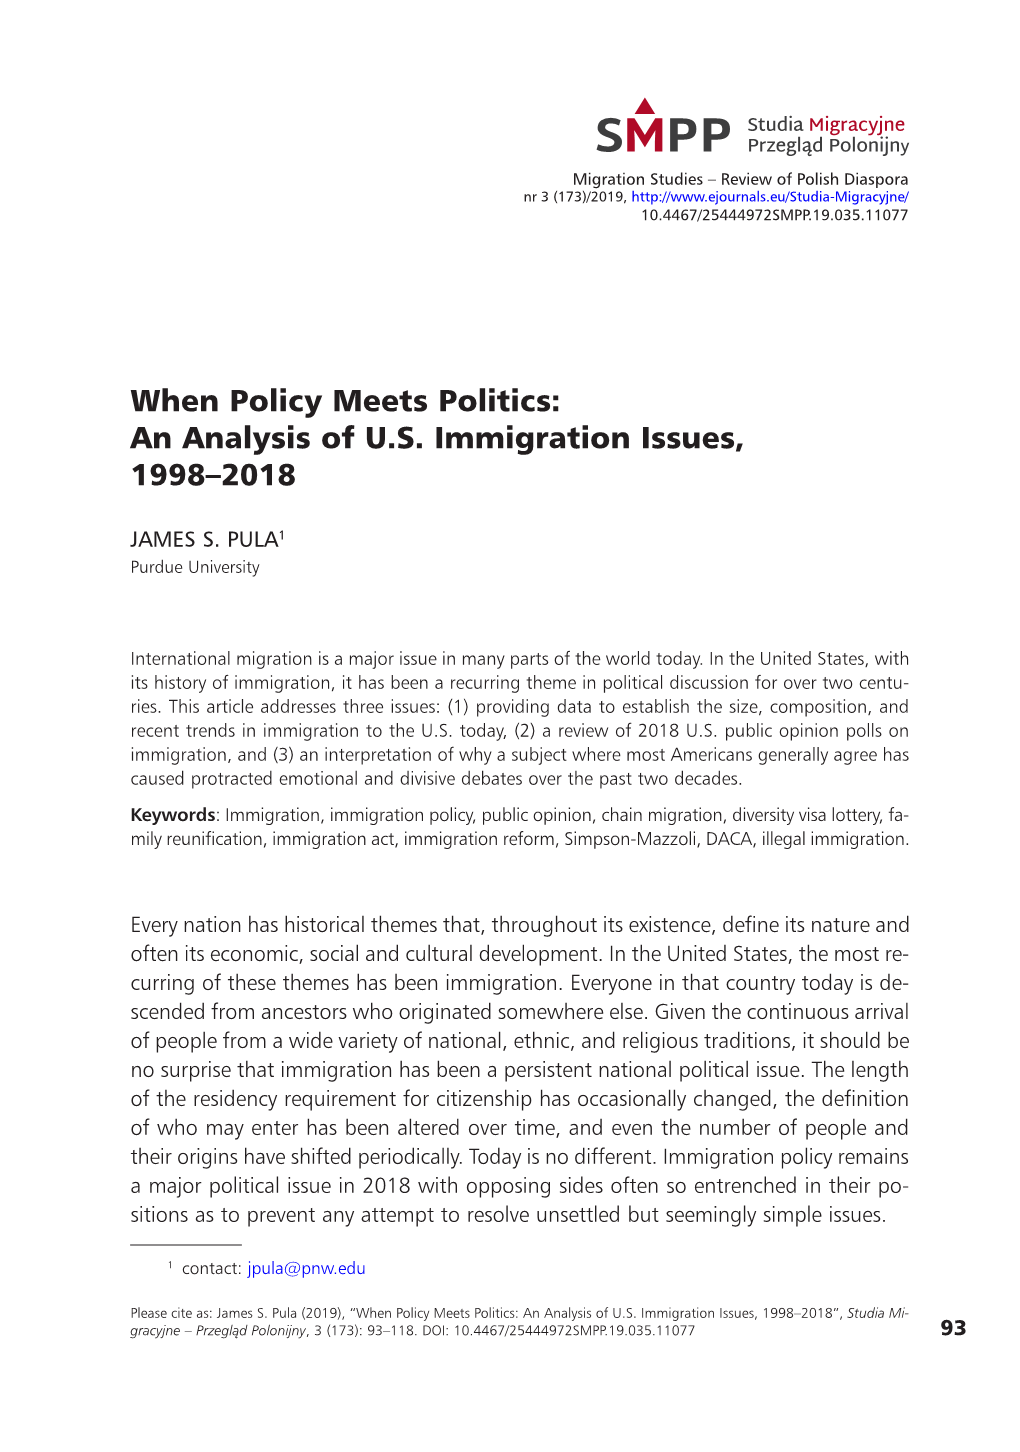 When Policy Meets Politics: an Analysis of U.S. Immigration Issues, 1998–2018